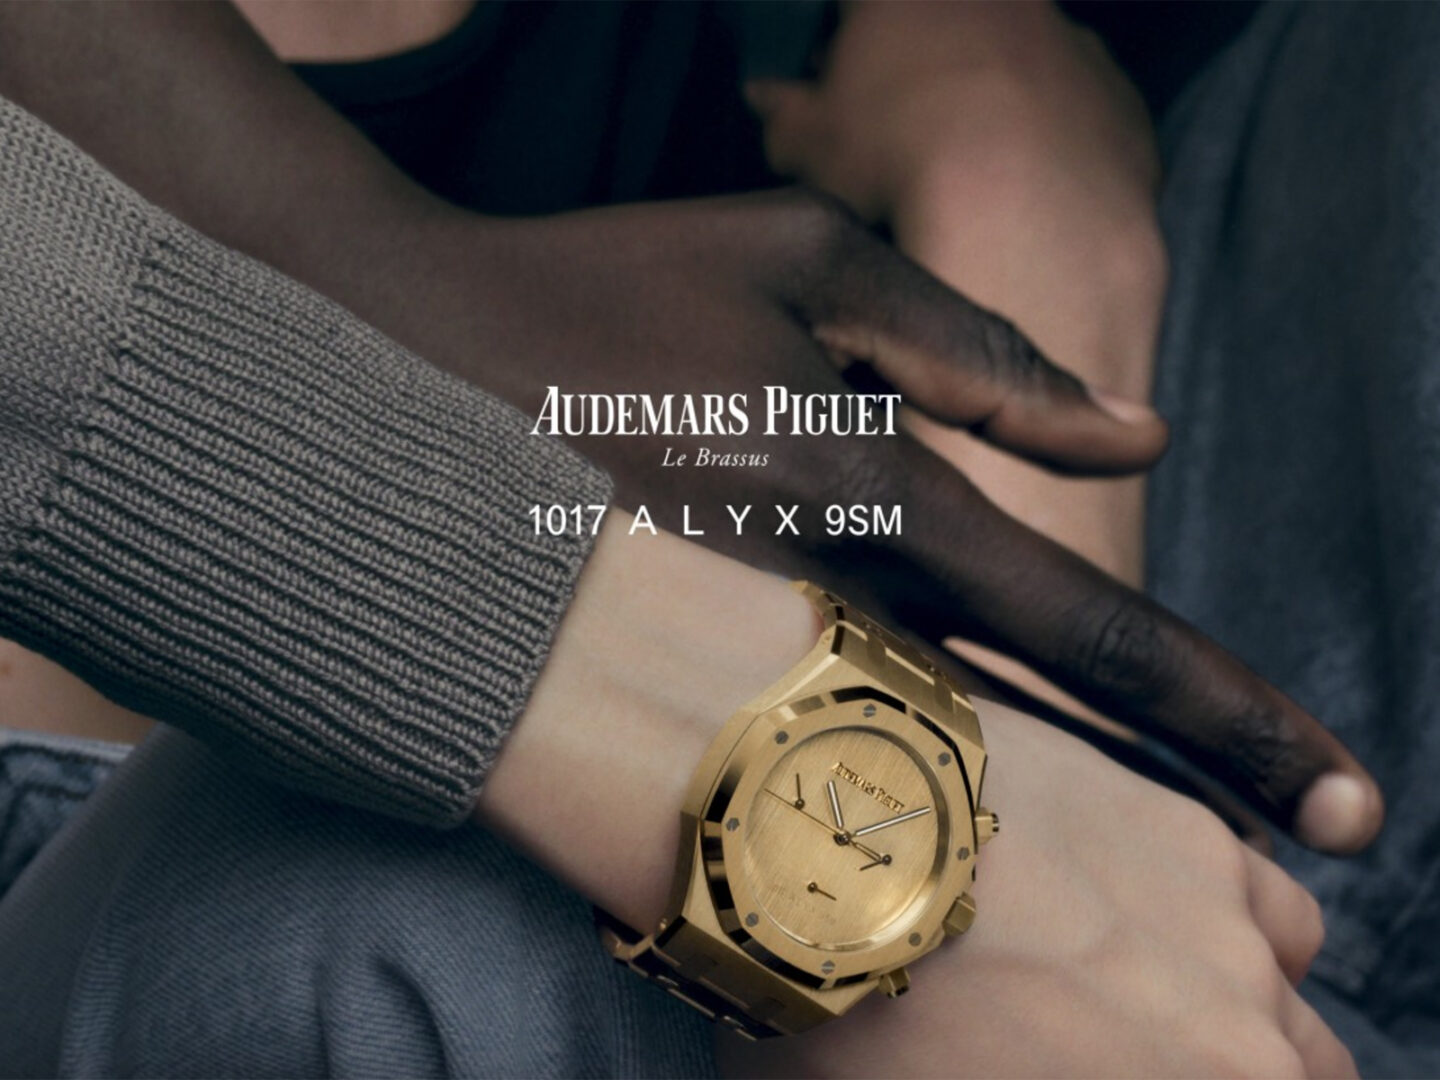 Audemars Piguet turns to 1017 ALYX 9SM to design an exclusive collection